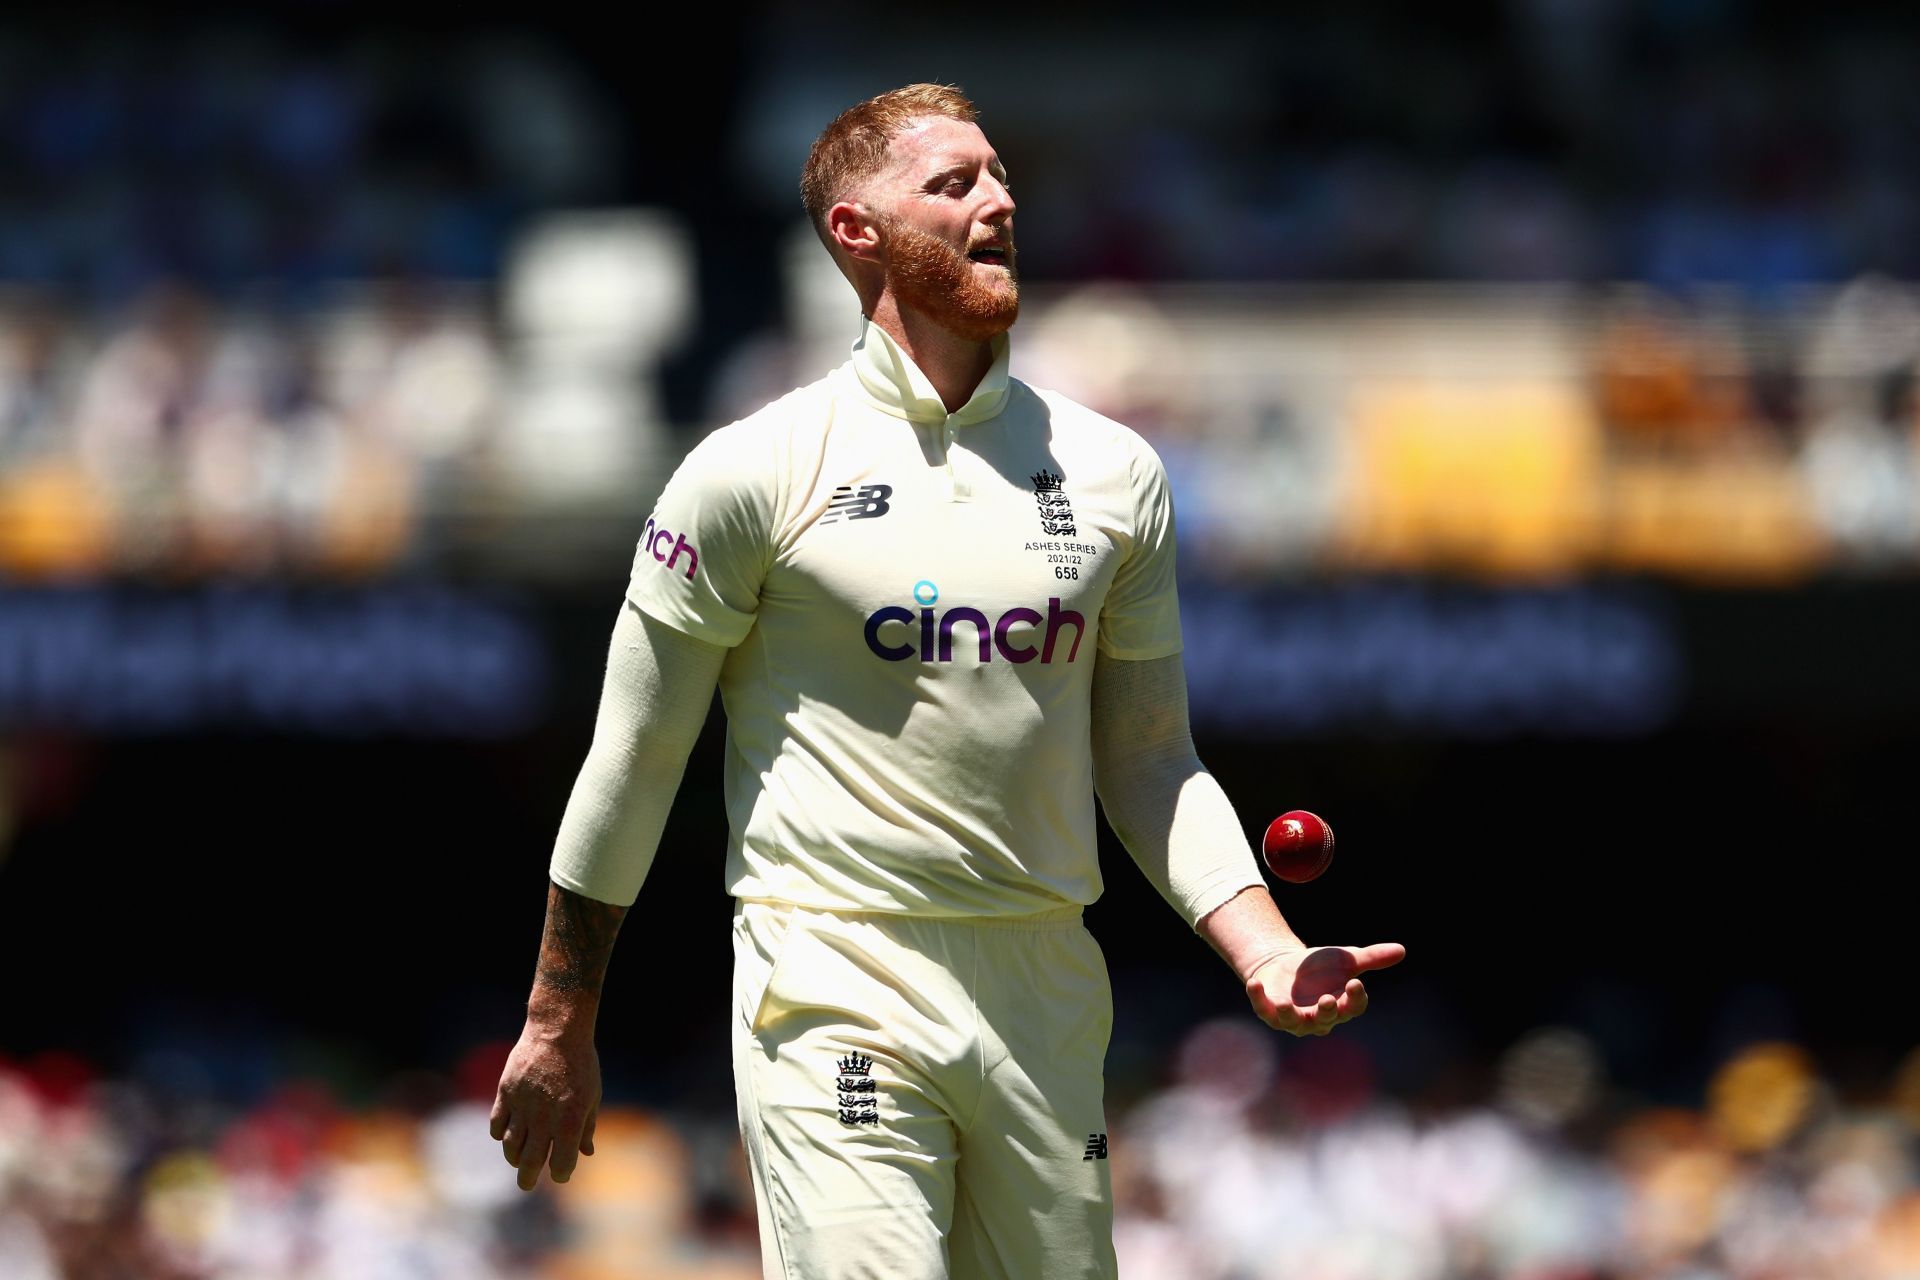 Ben Stokes is coming into the Ashes off a six month hiatus